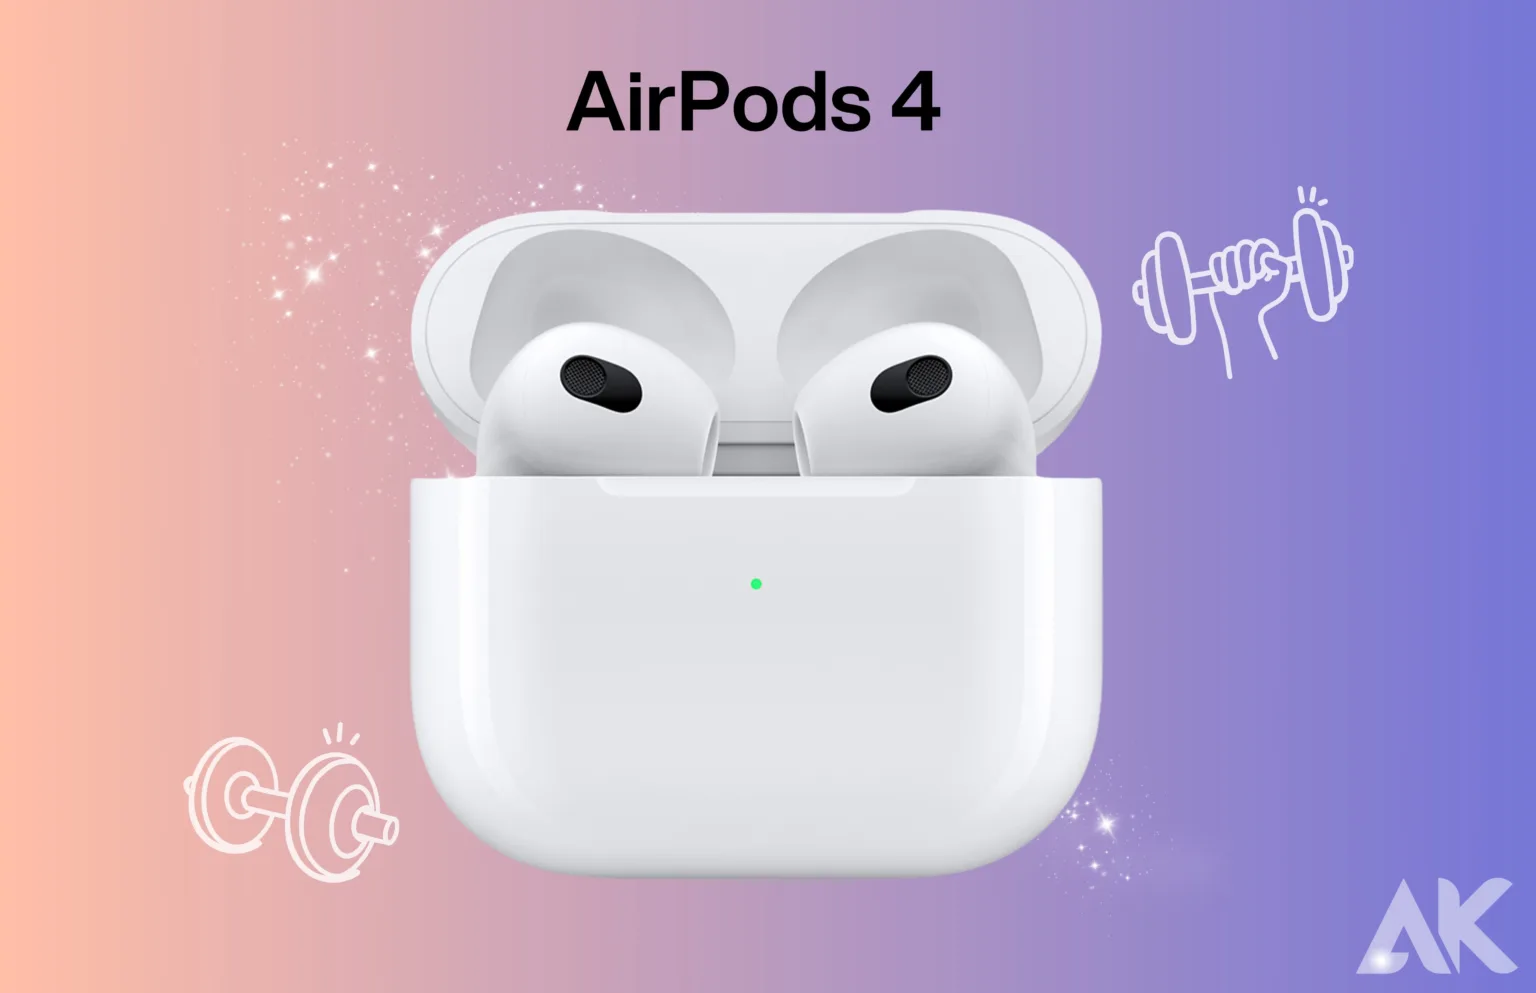 Airpods 4 price